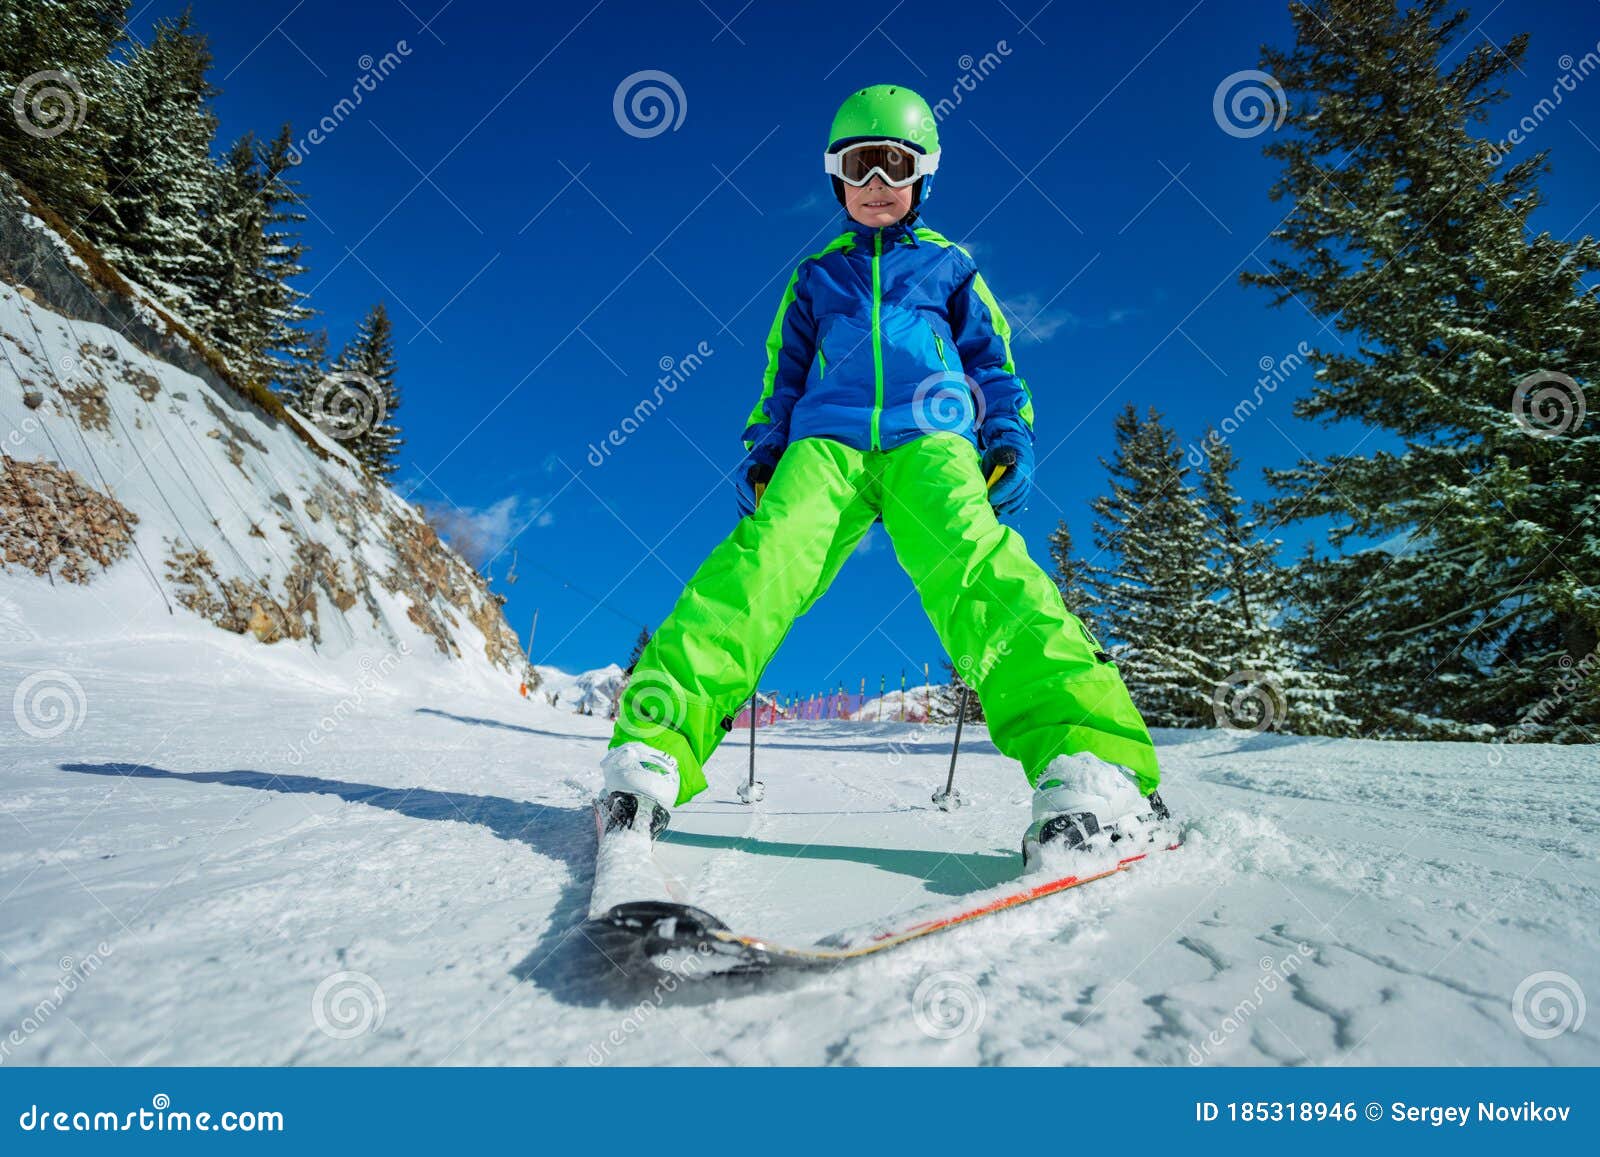 Cute Boy in Funny Ski Pose on Snowy Track Stock Photo - Image of